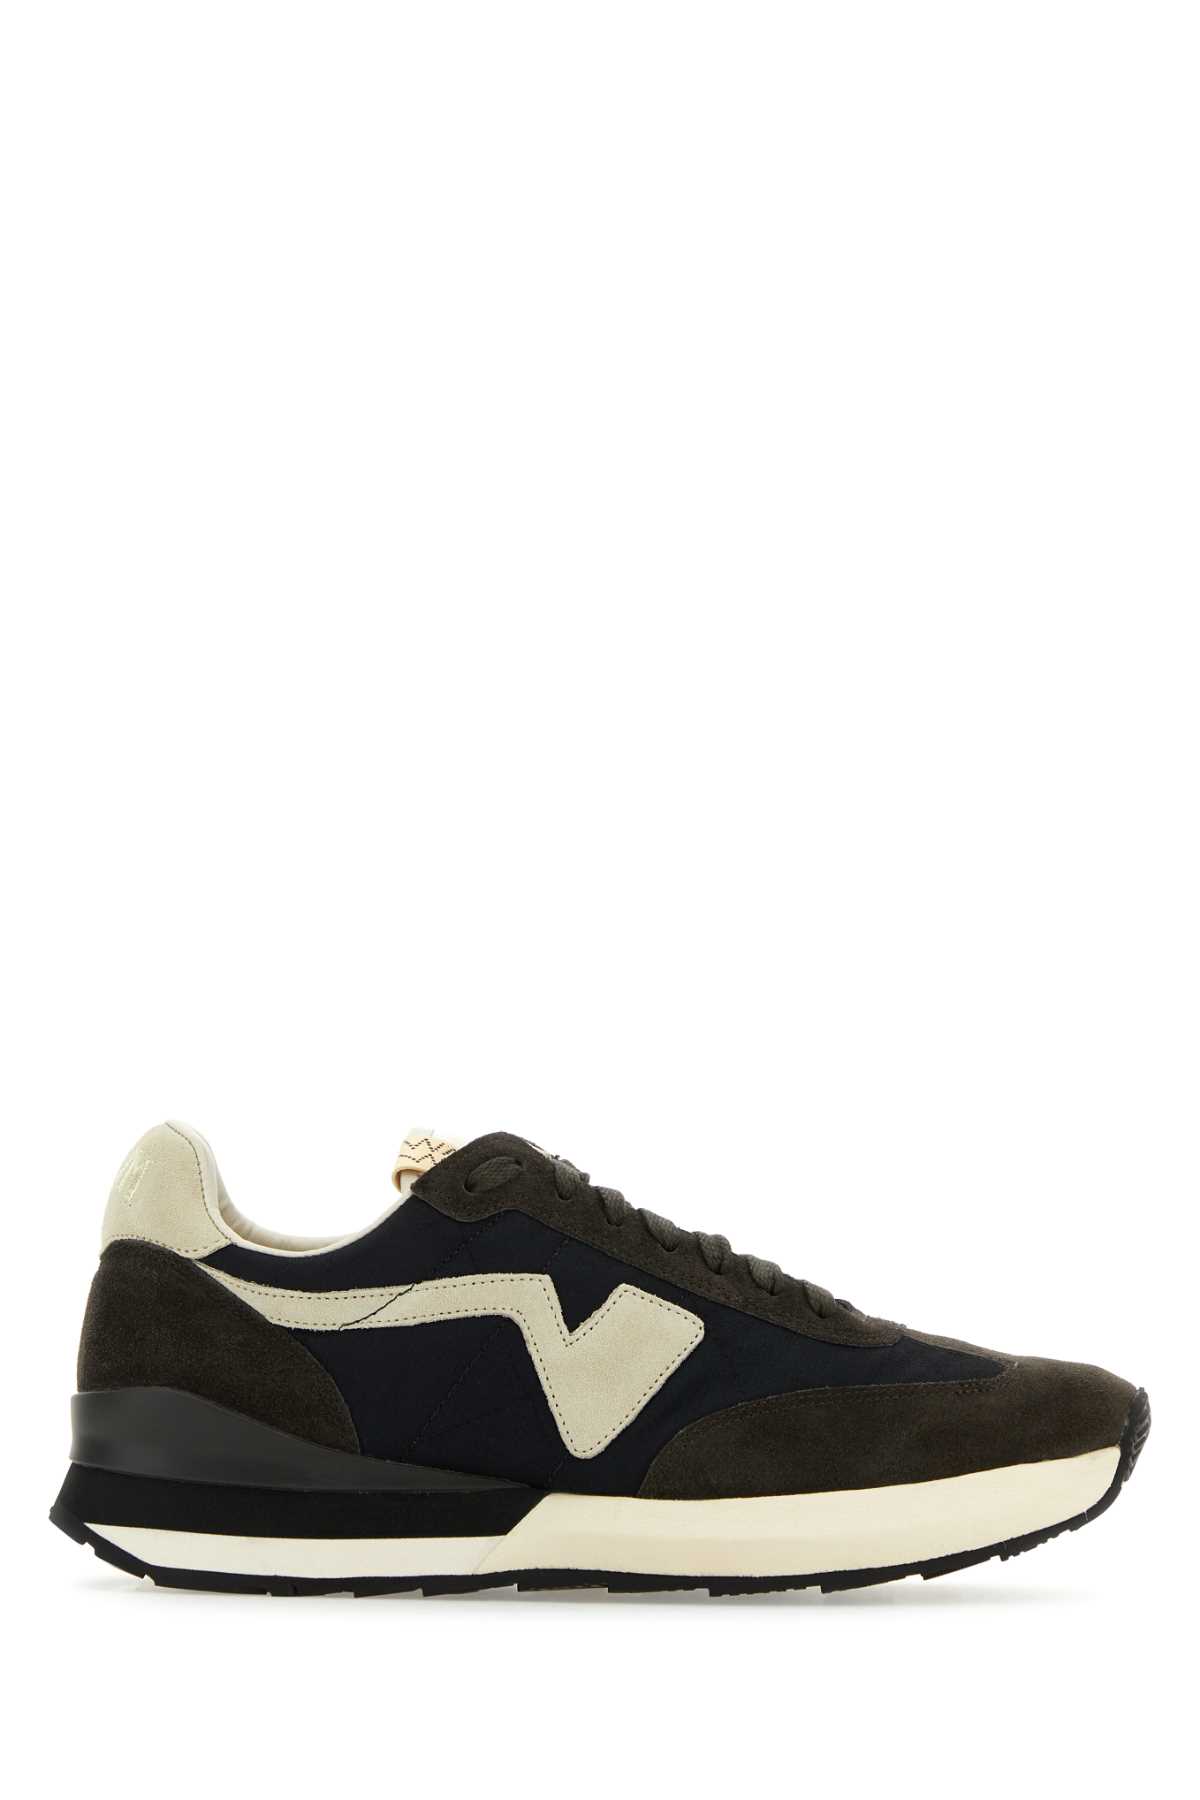 Multicolor Fabric And Suede Dunand Trainer Sneakers